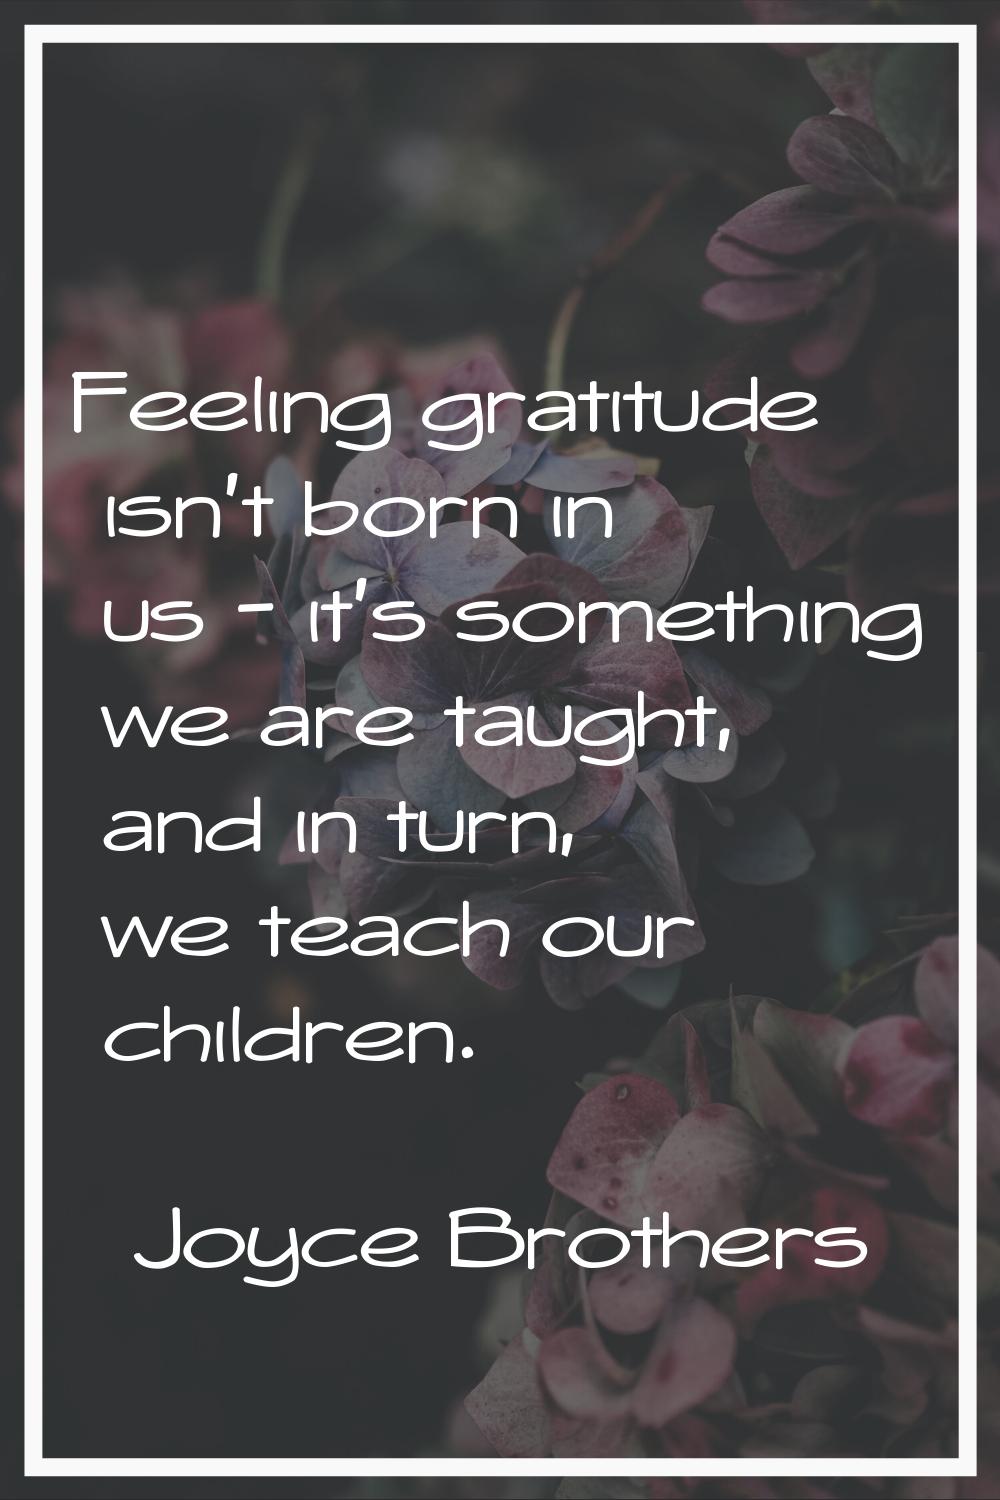 Feeling gratitude isn't born in us - it's something we are taught, and in turn, we teach our childr